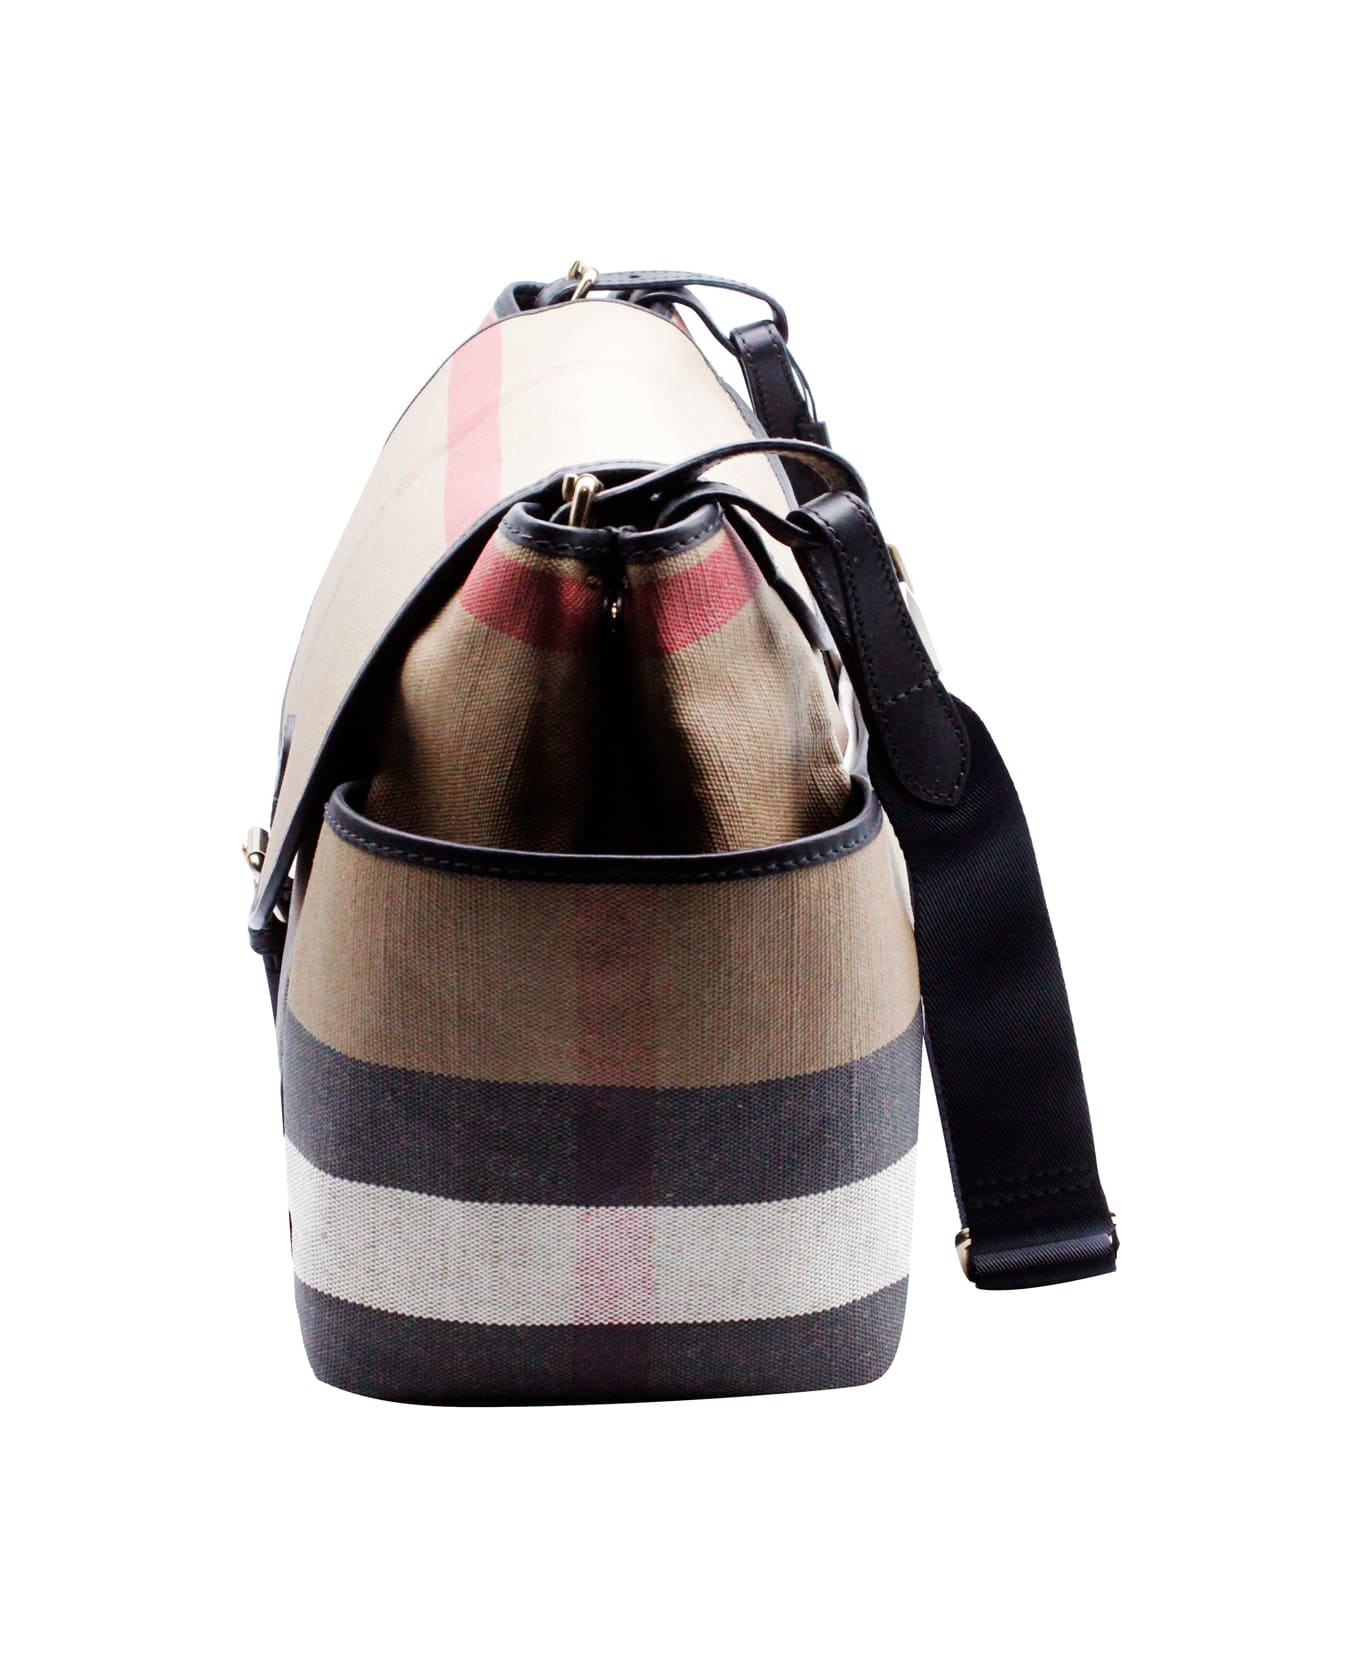 Burberry Mum Changing Bag Made Of Cotton Canvas With Check Pattern With Shoulder Strap, Comfortable Internal Pockets And Changing Mat. Measures Cm. 38x30x17 - Check